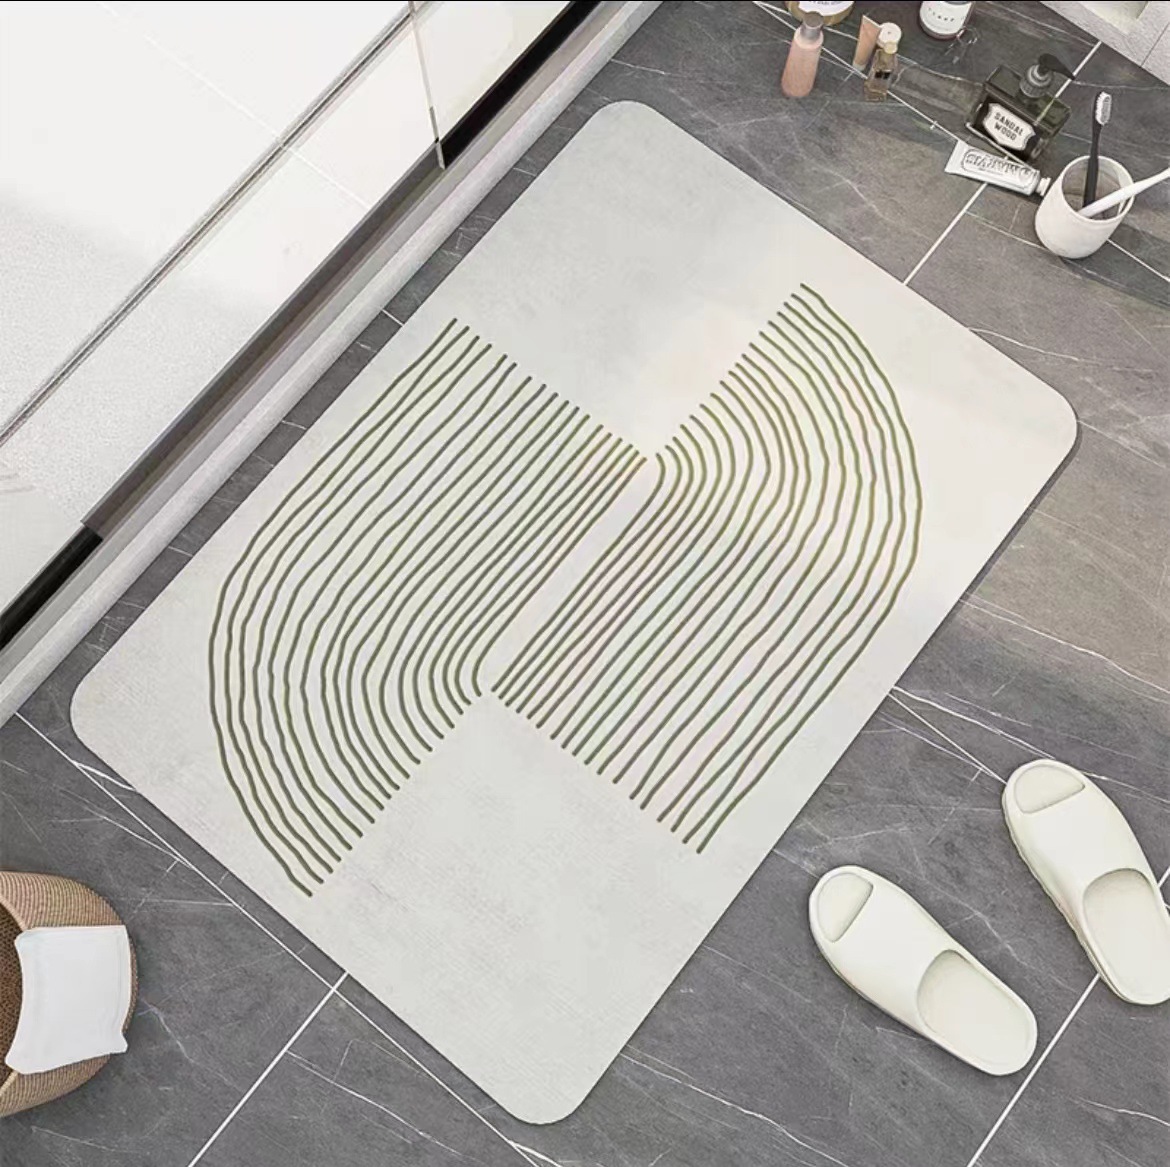 Dropship Diatomite Bathroom Super Absorbent Mat Non-slip Home Kitchen  Toilet Quick Drying Floor Mats Room Doormat Oil Proof Floor Mats to Sell  Online at a Lower Price